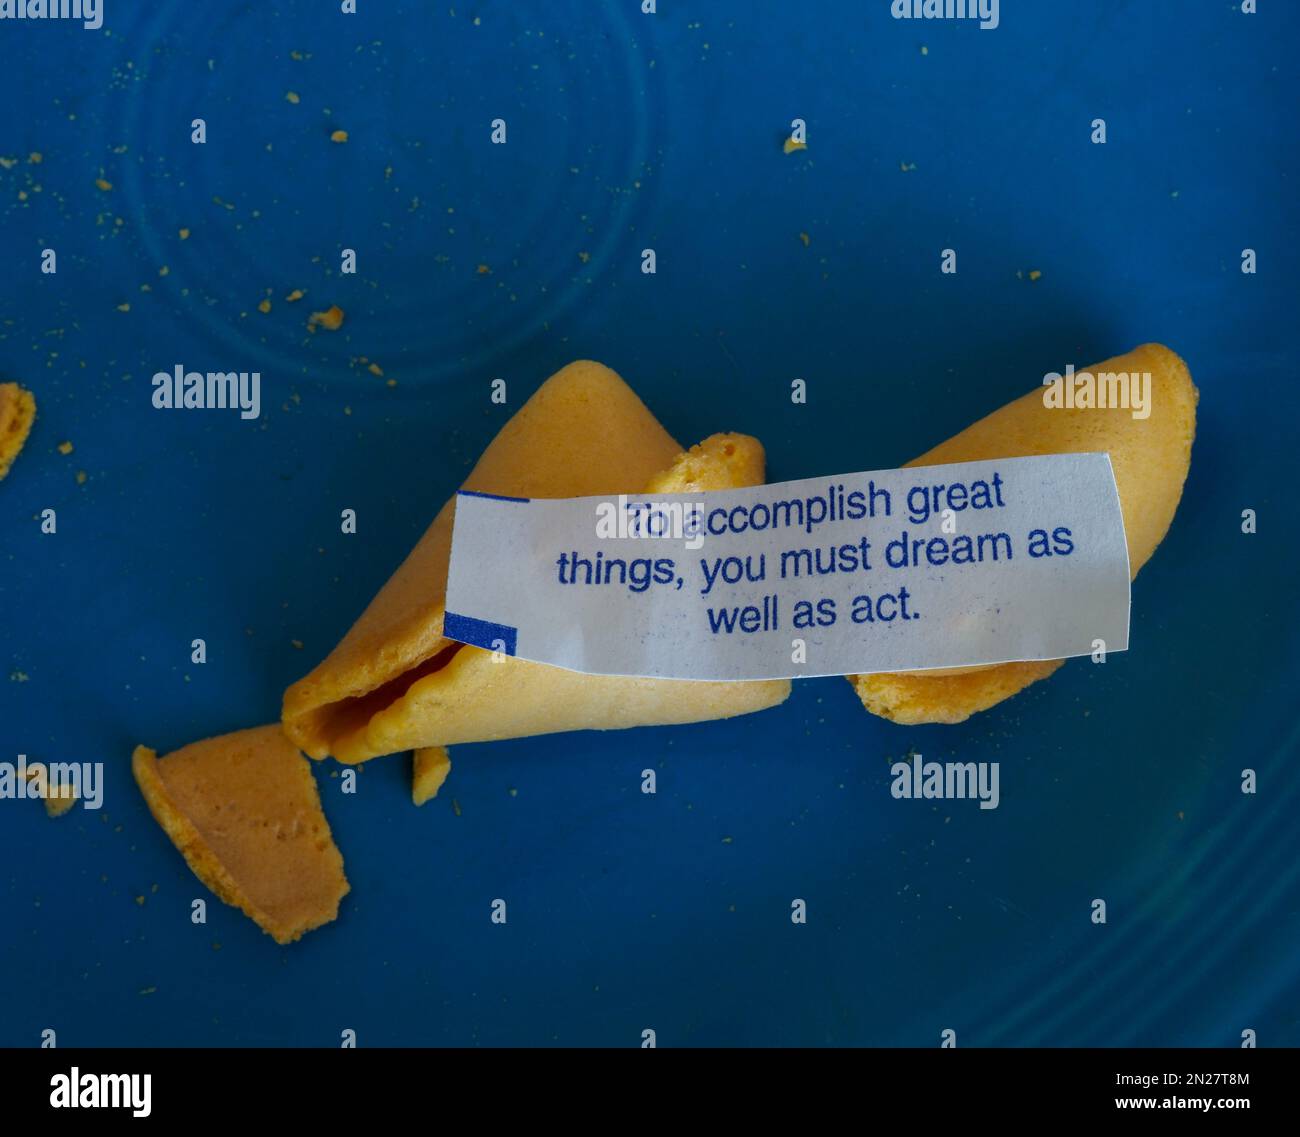 Fortune cookie positing that dreams happen when you act. Stock Photo